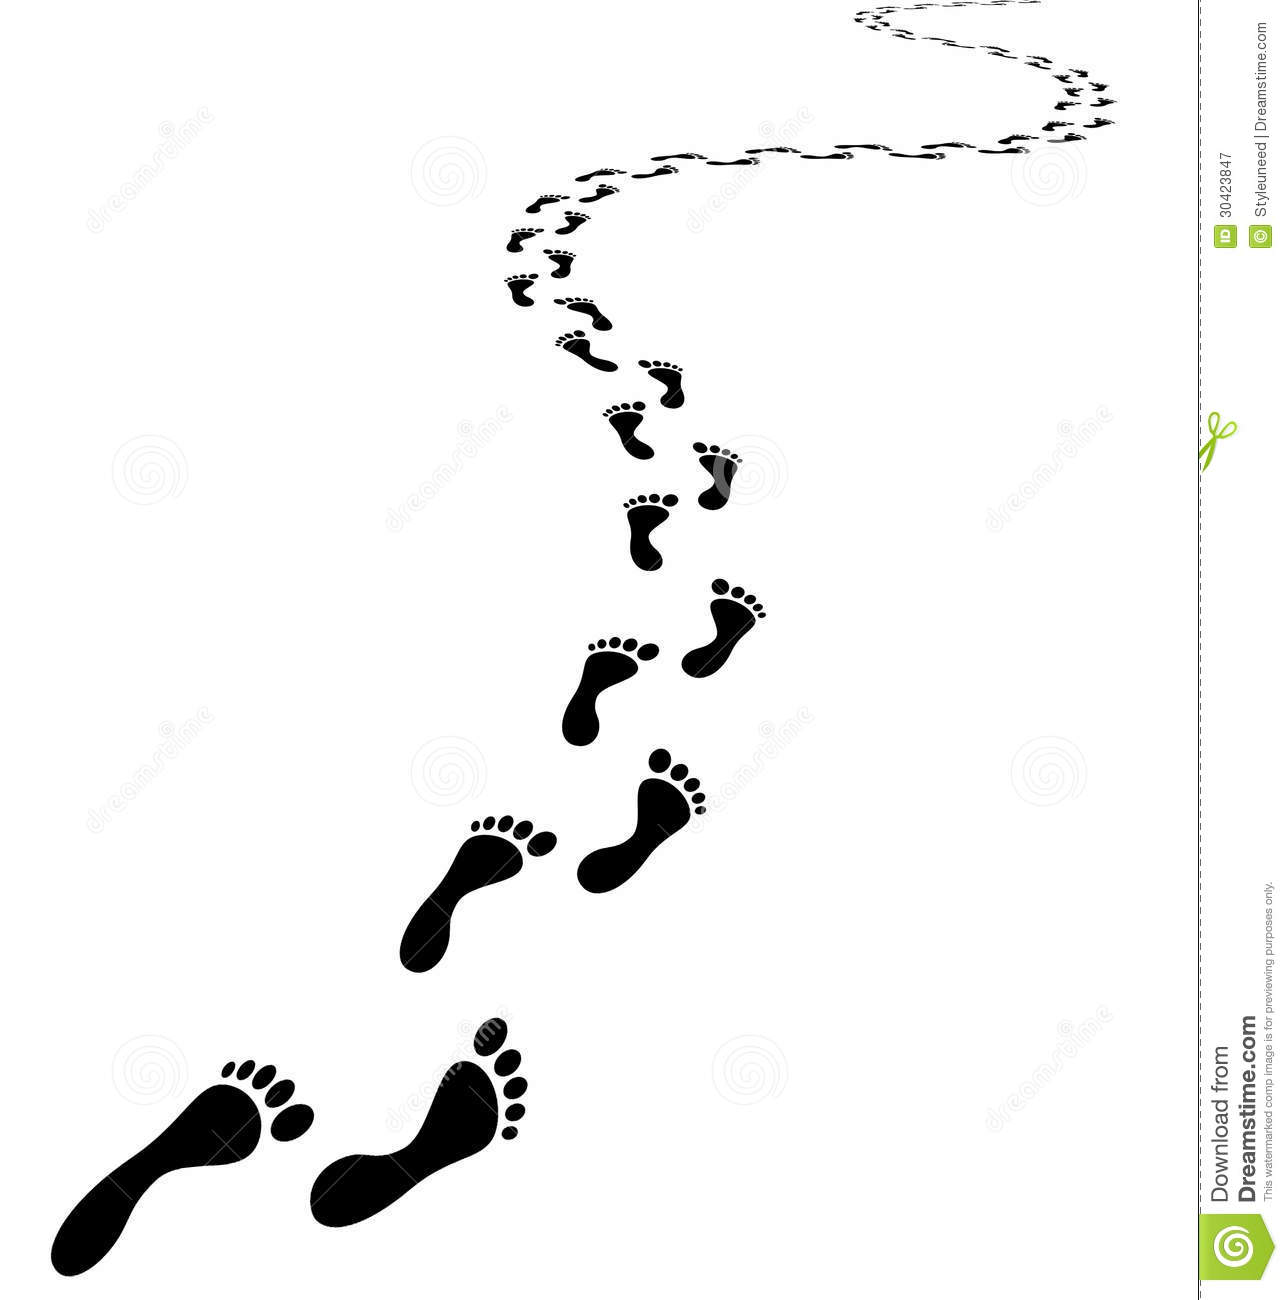 pathway clipart route